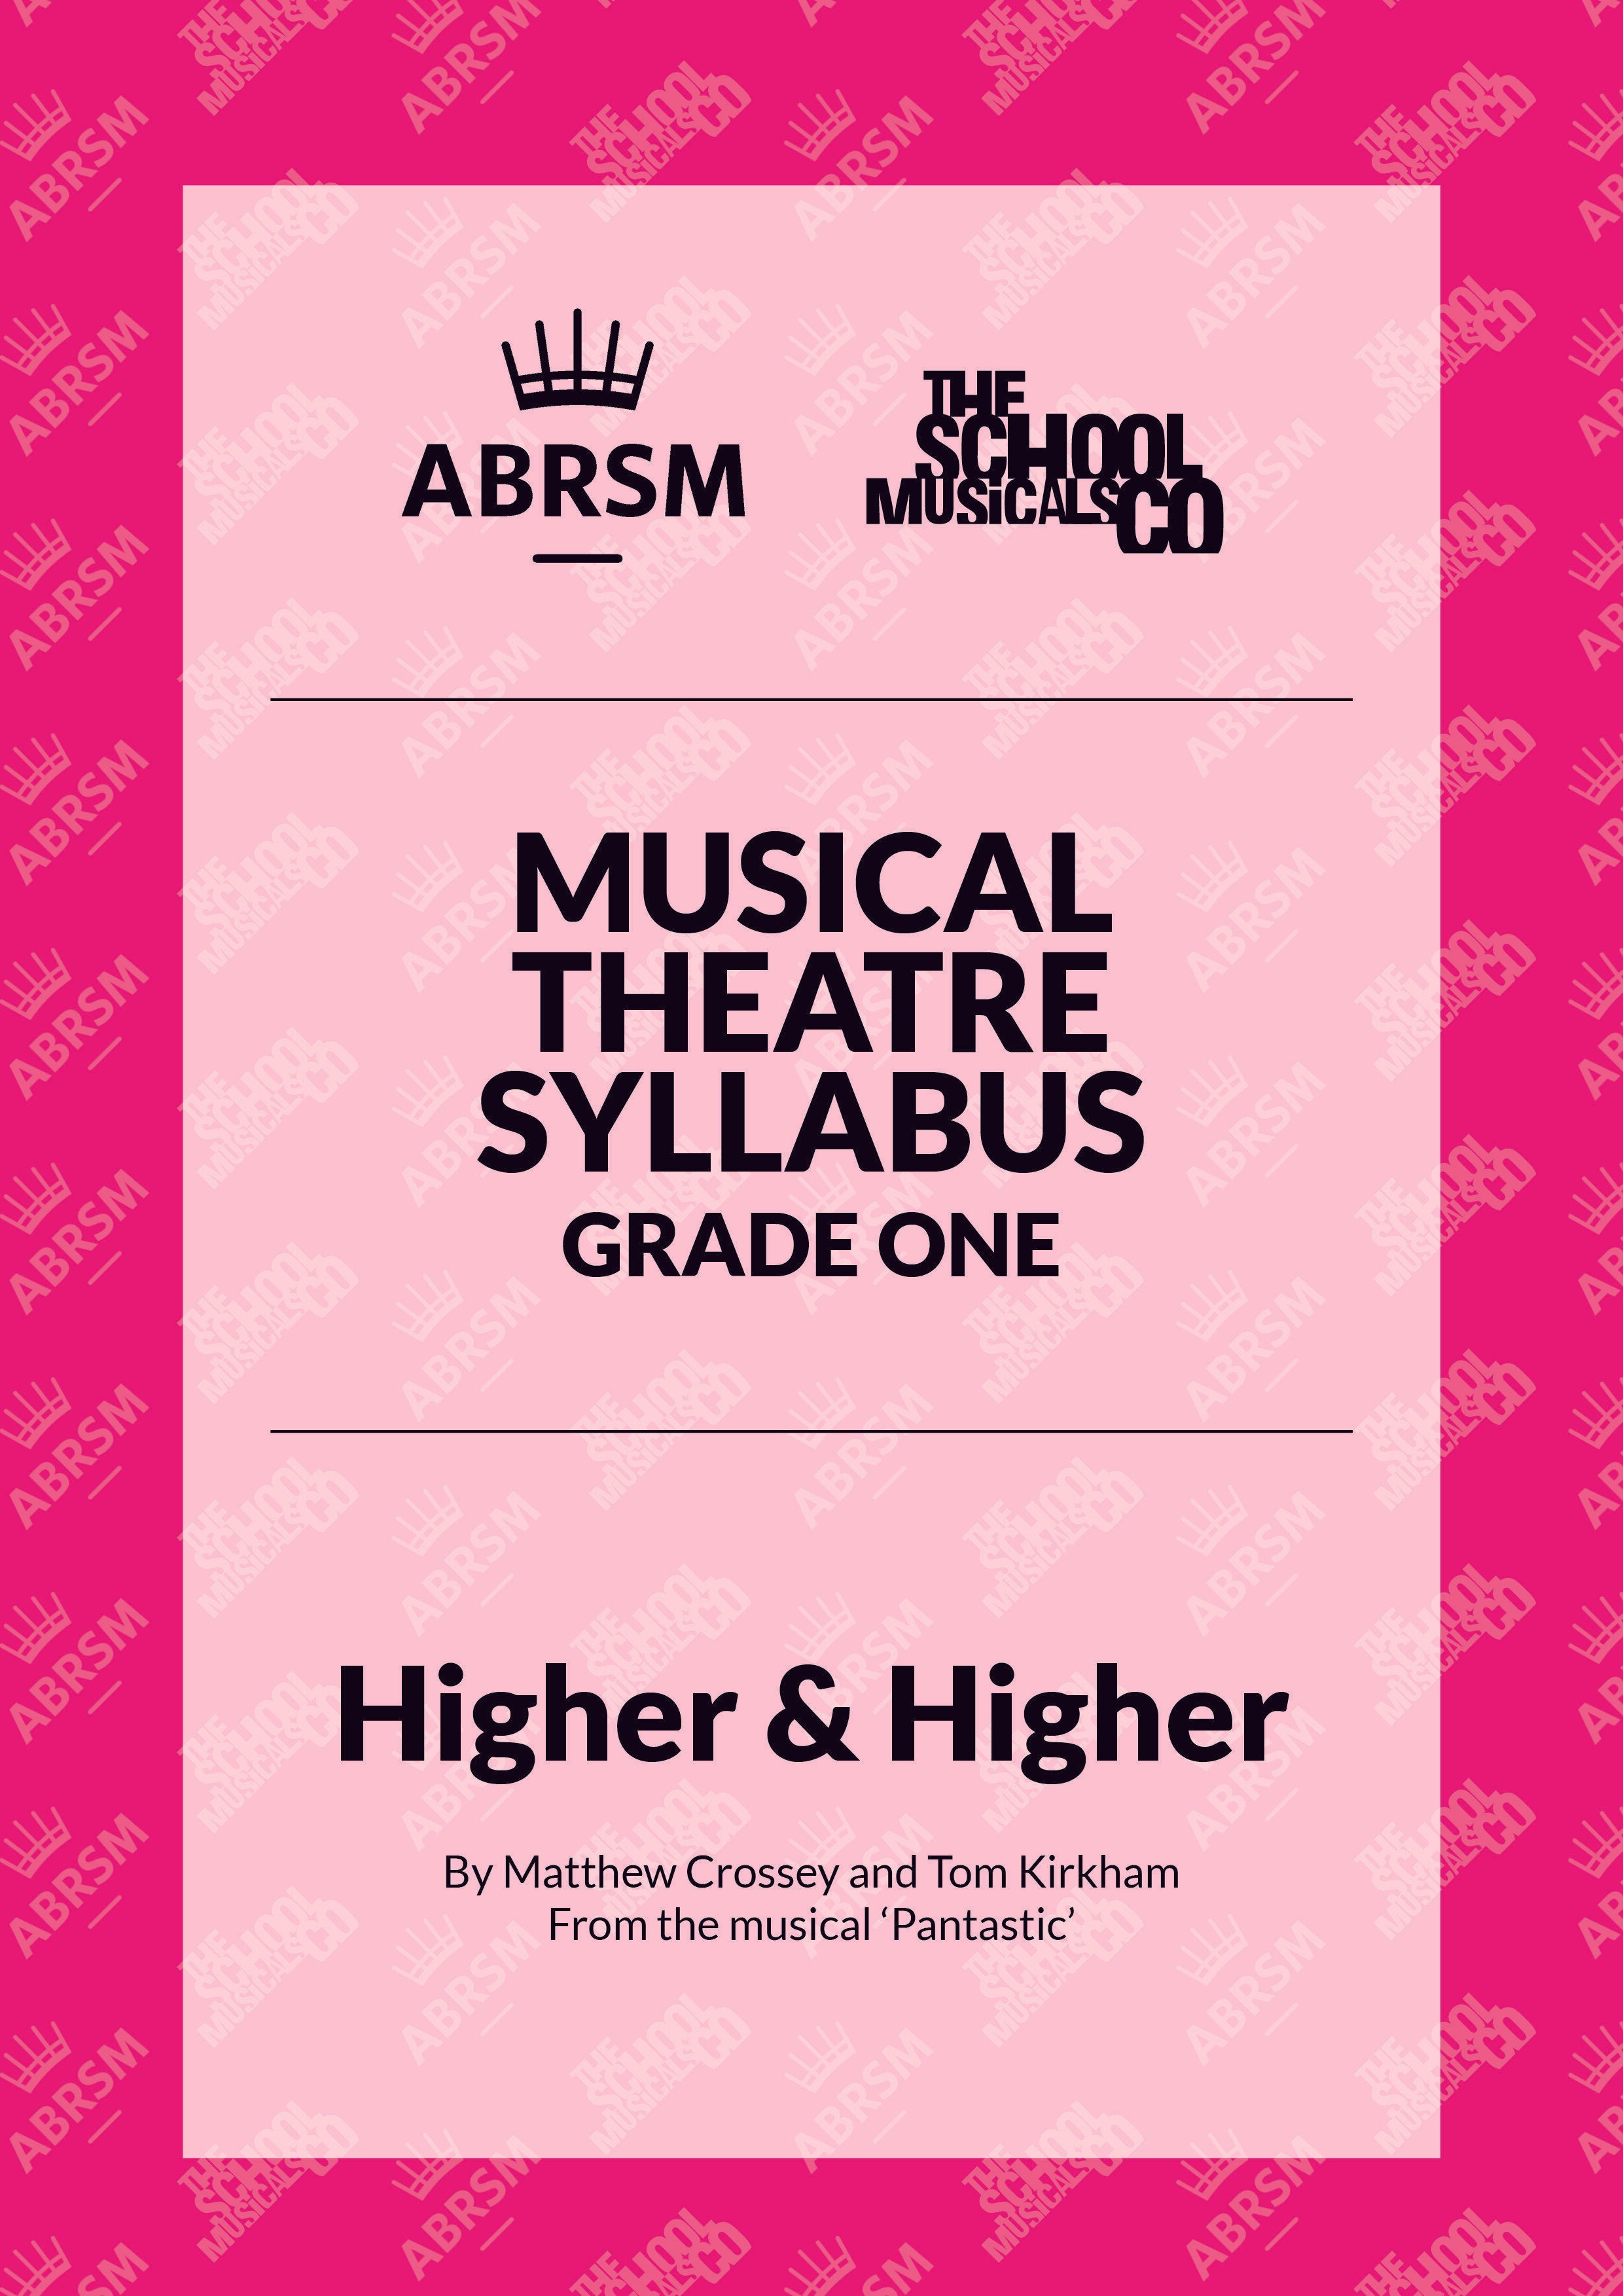 Higher And Higher - ABRSM Musical Theatre Syllabus Grade One